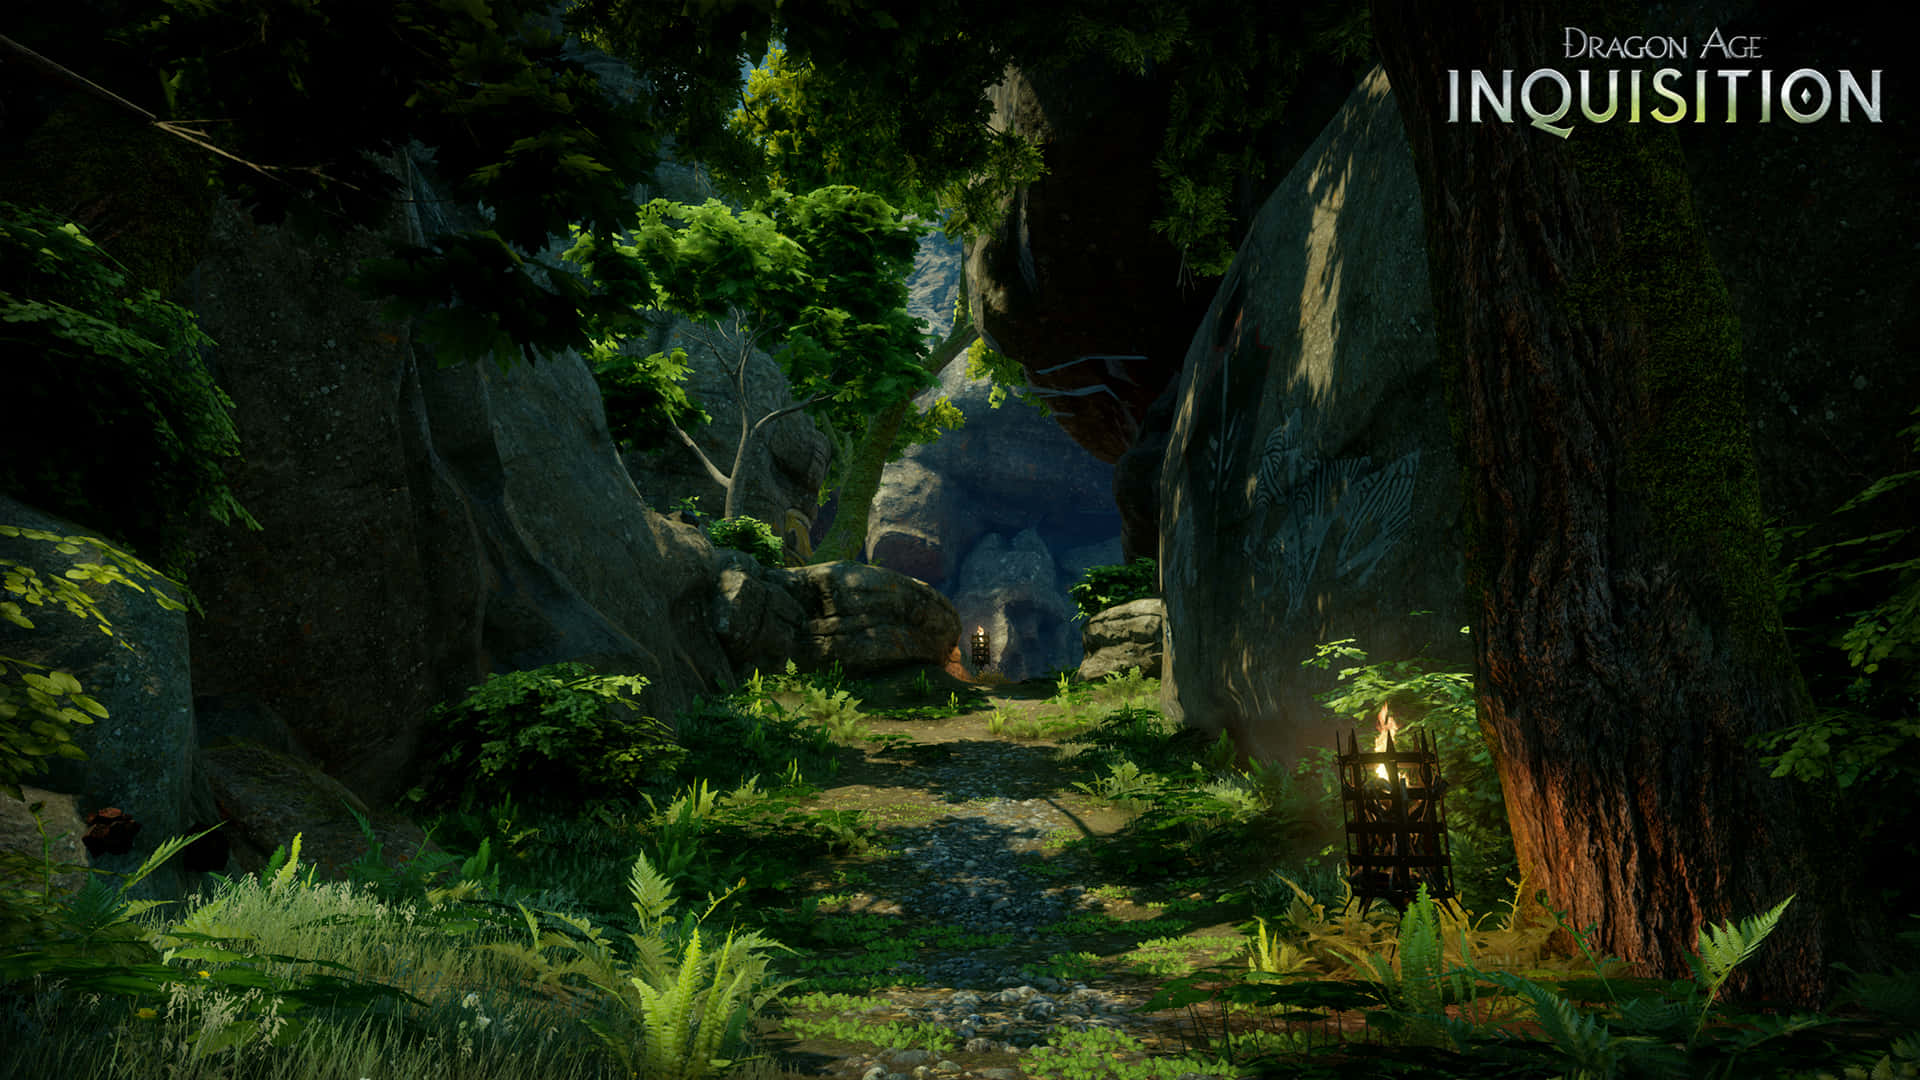 Embark on a heroic journey in the ‘Best Dragon Age Inquisition’.